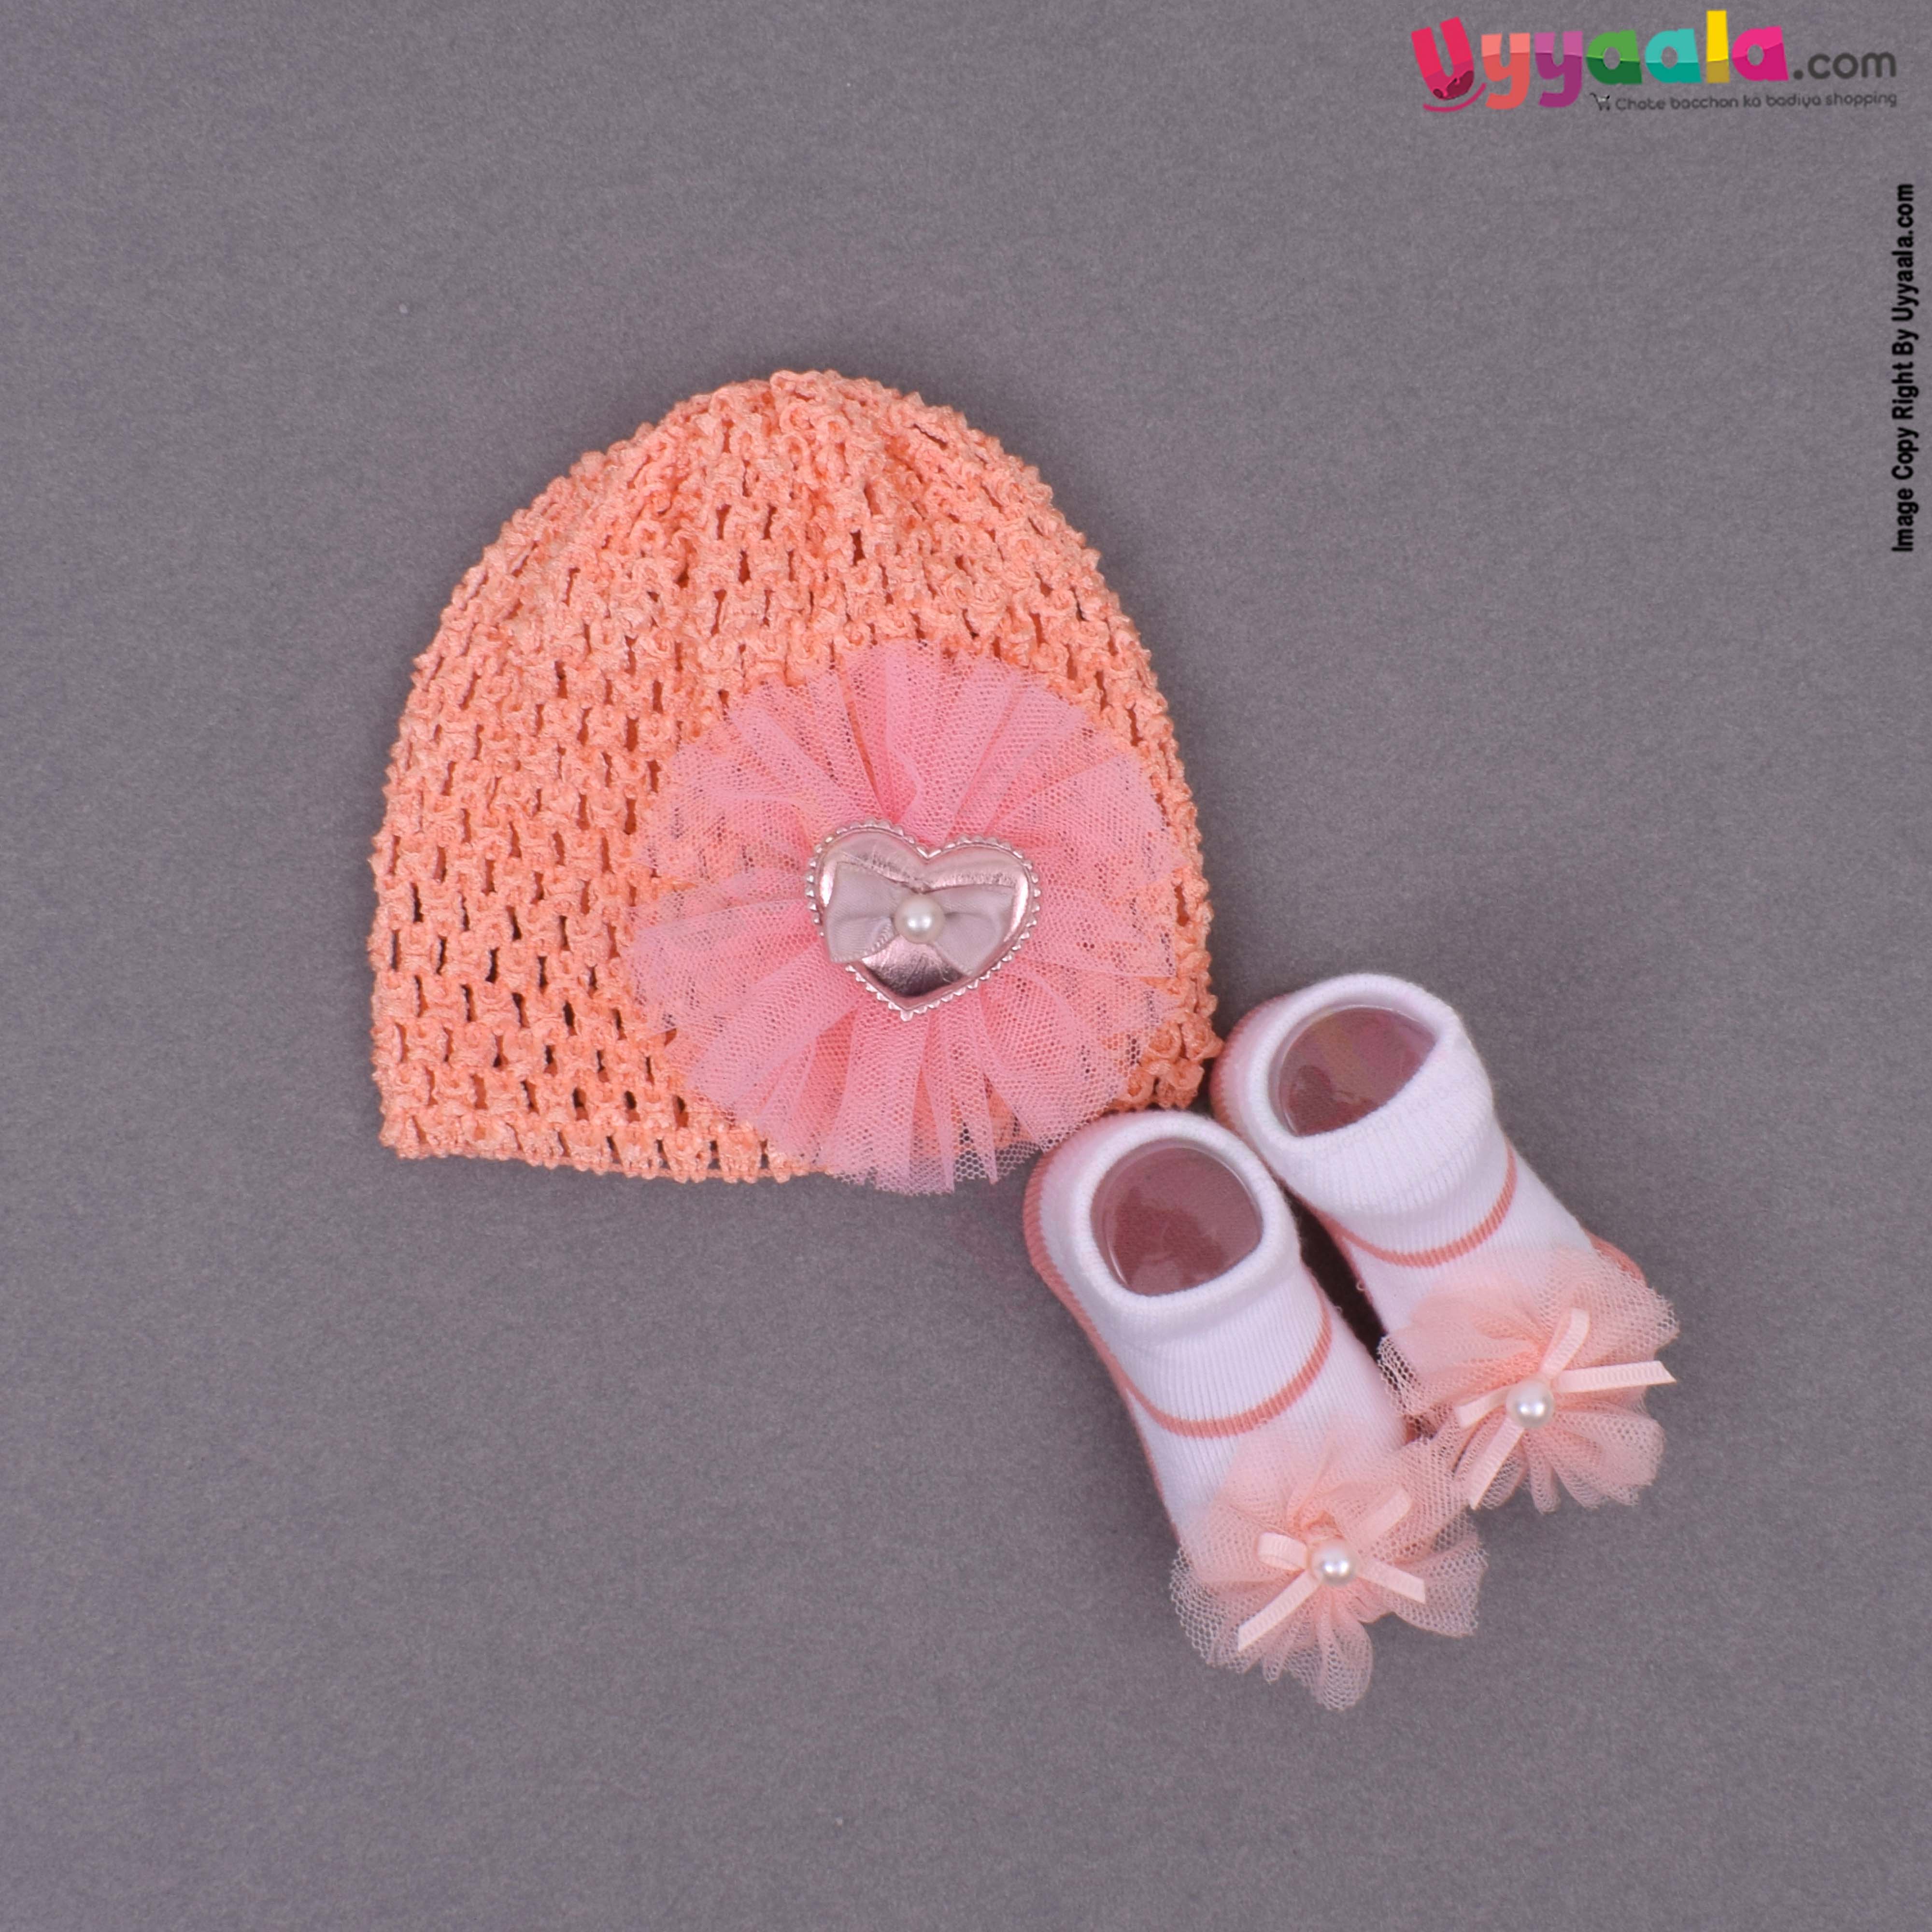 SHINY BABY Accessory set for kids with cap and socks - orange